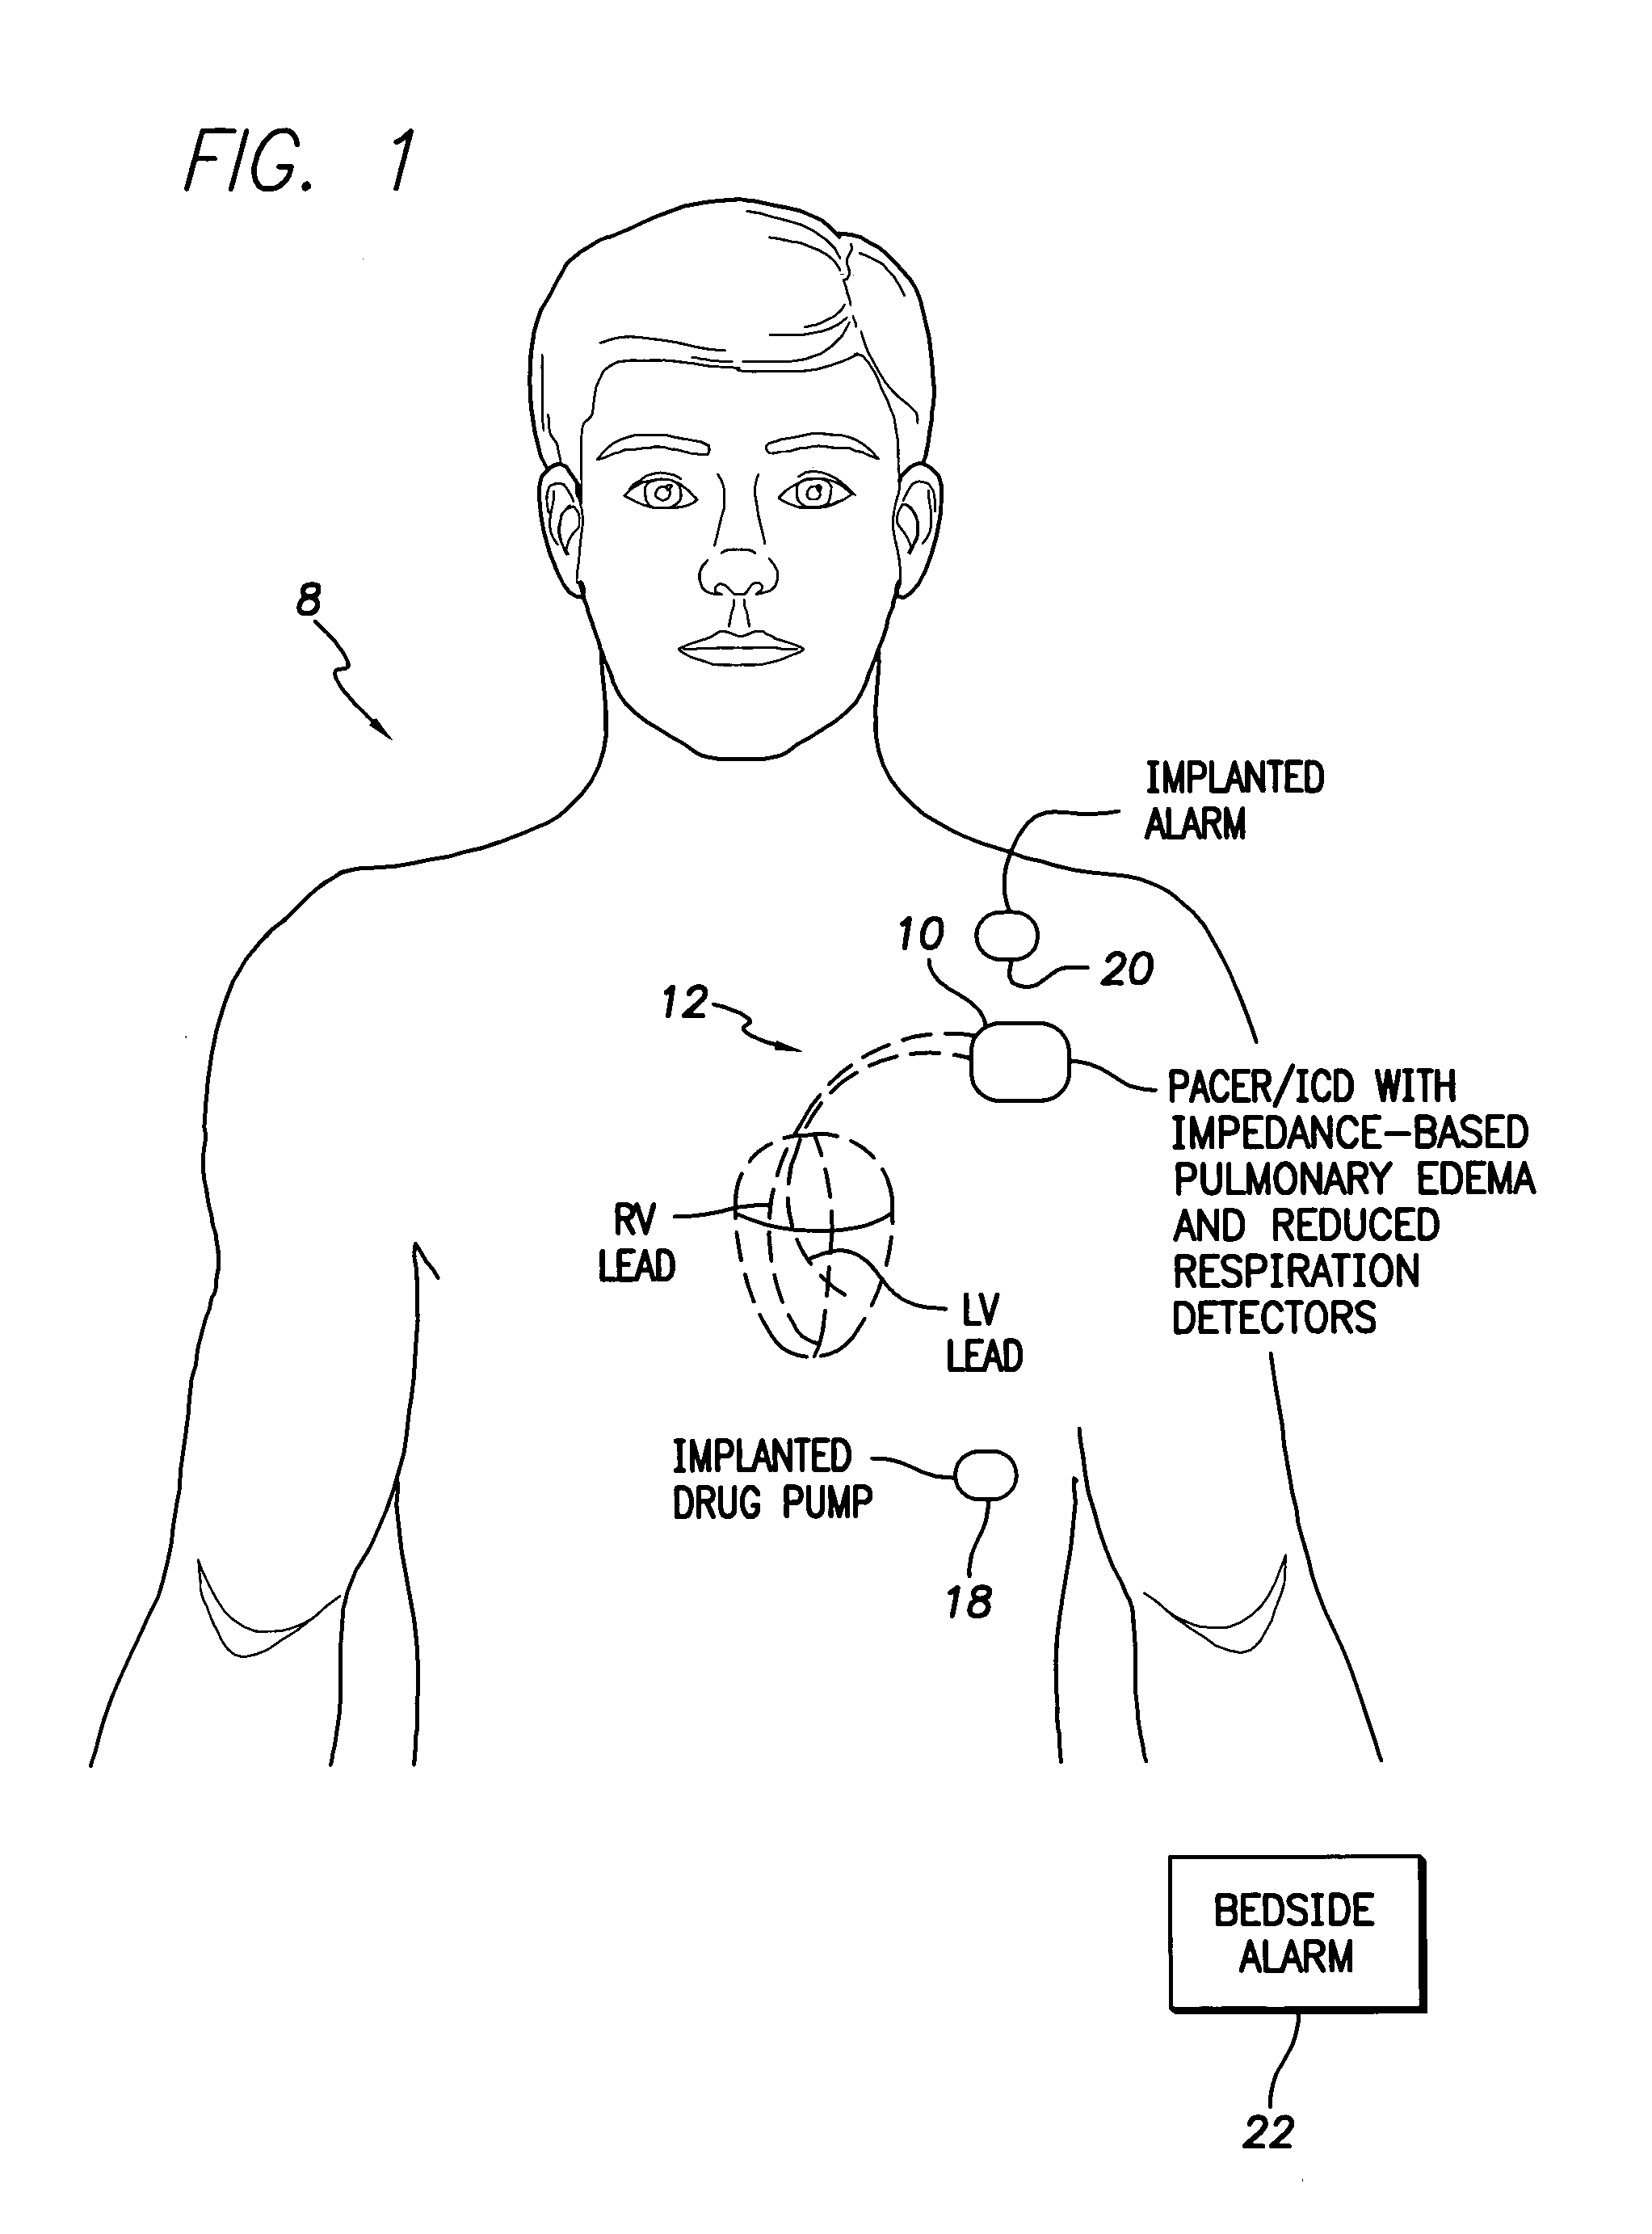 System and method for impedance-based detection of pulmonary edema and reduced respiration using an implantable medical system